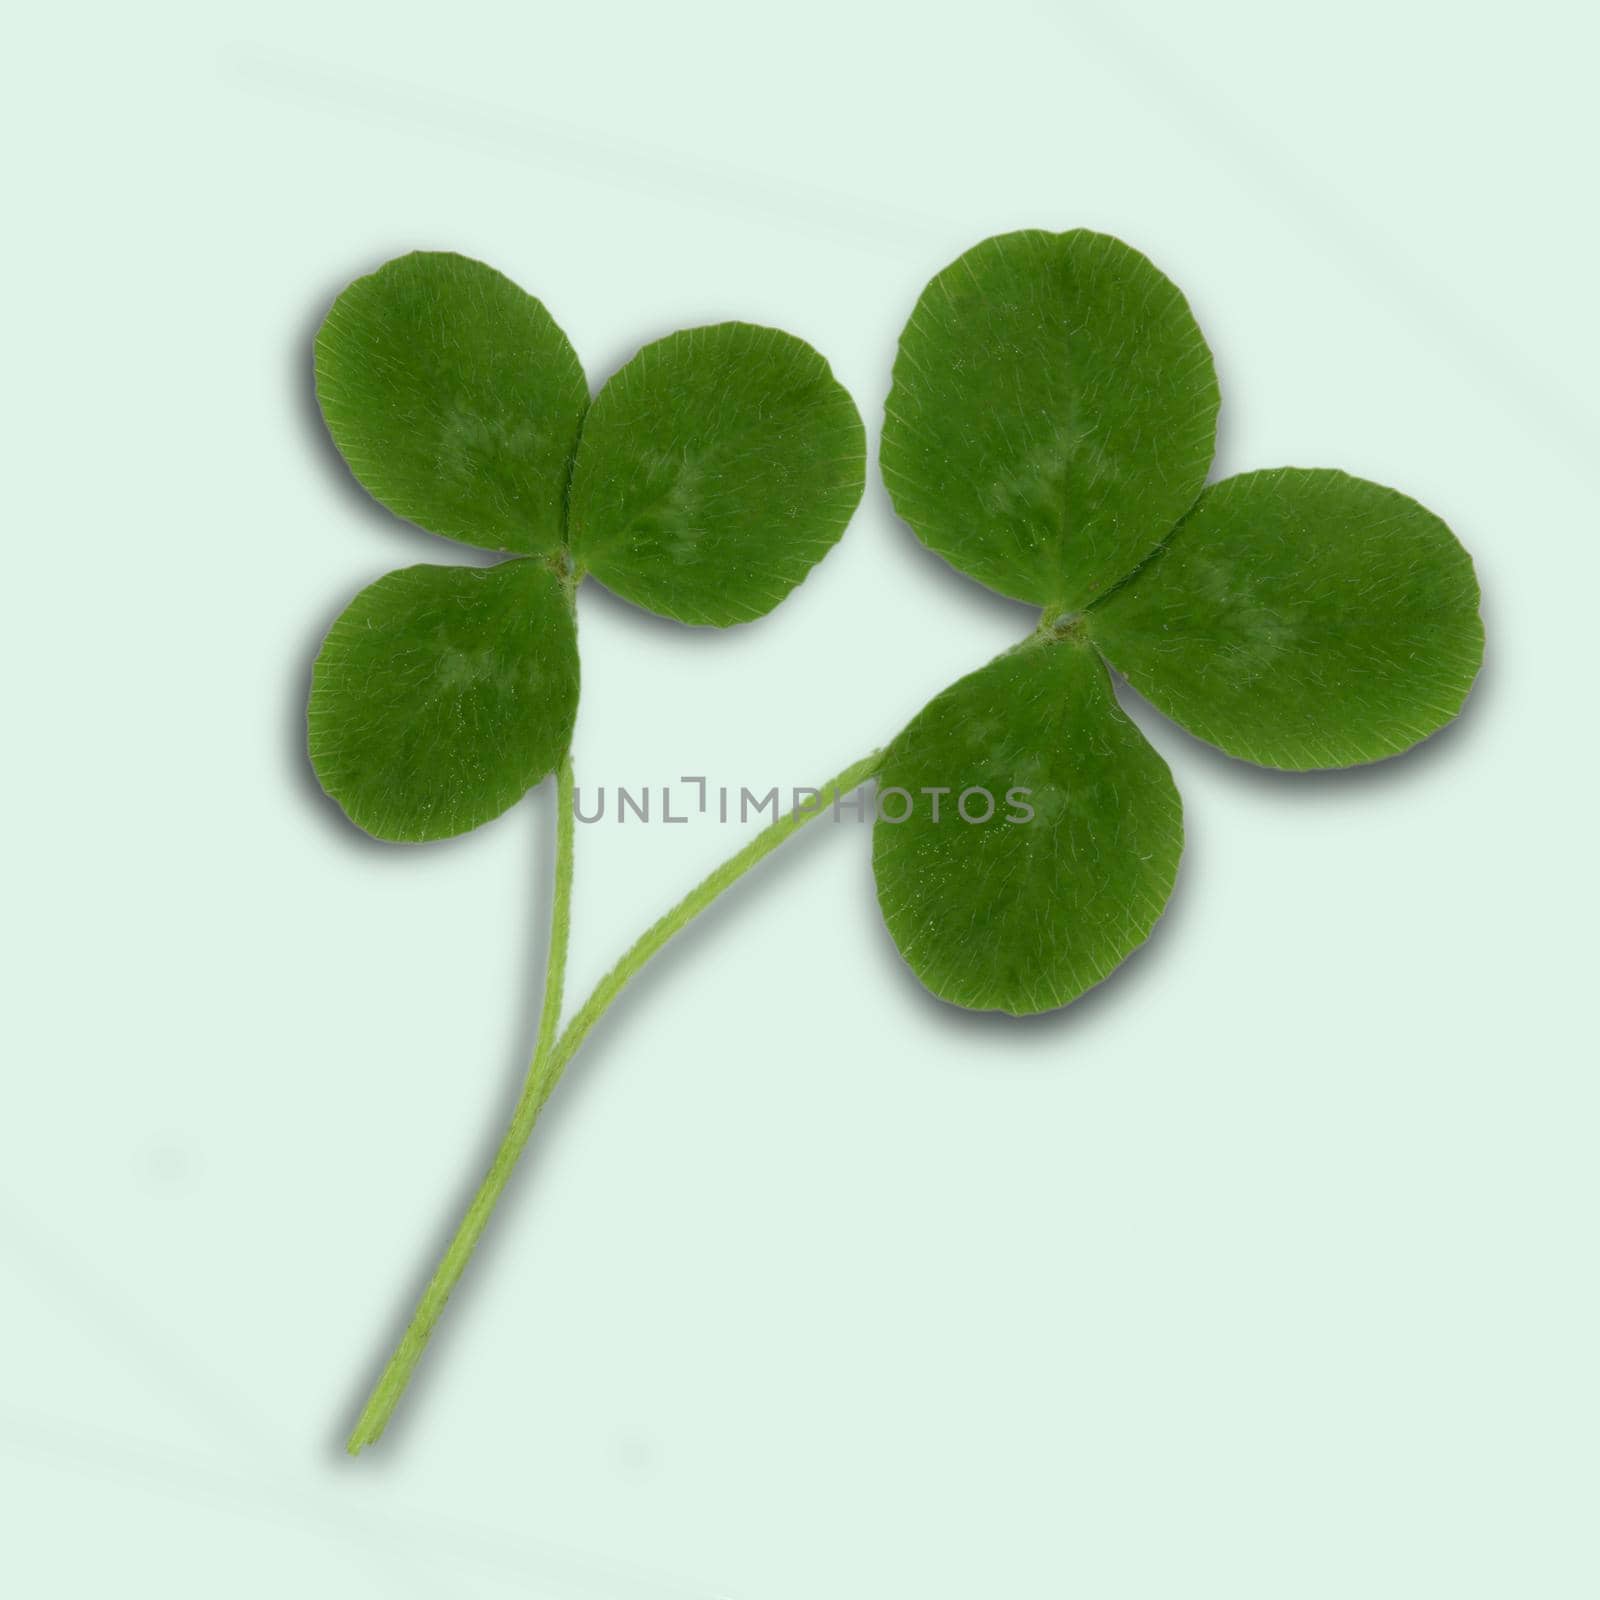 Two clover leafs cut out on a light green background.